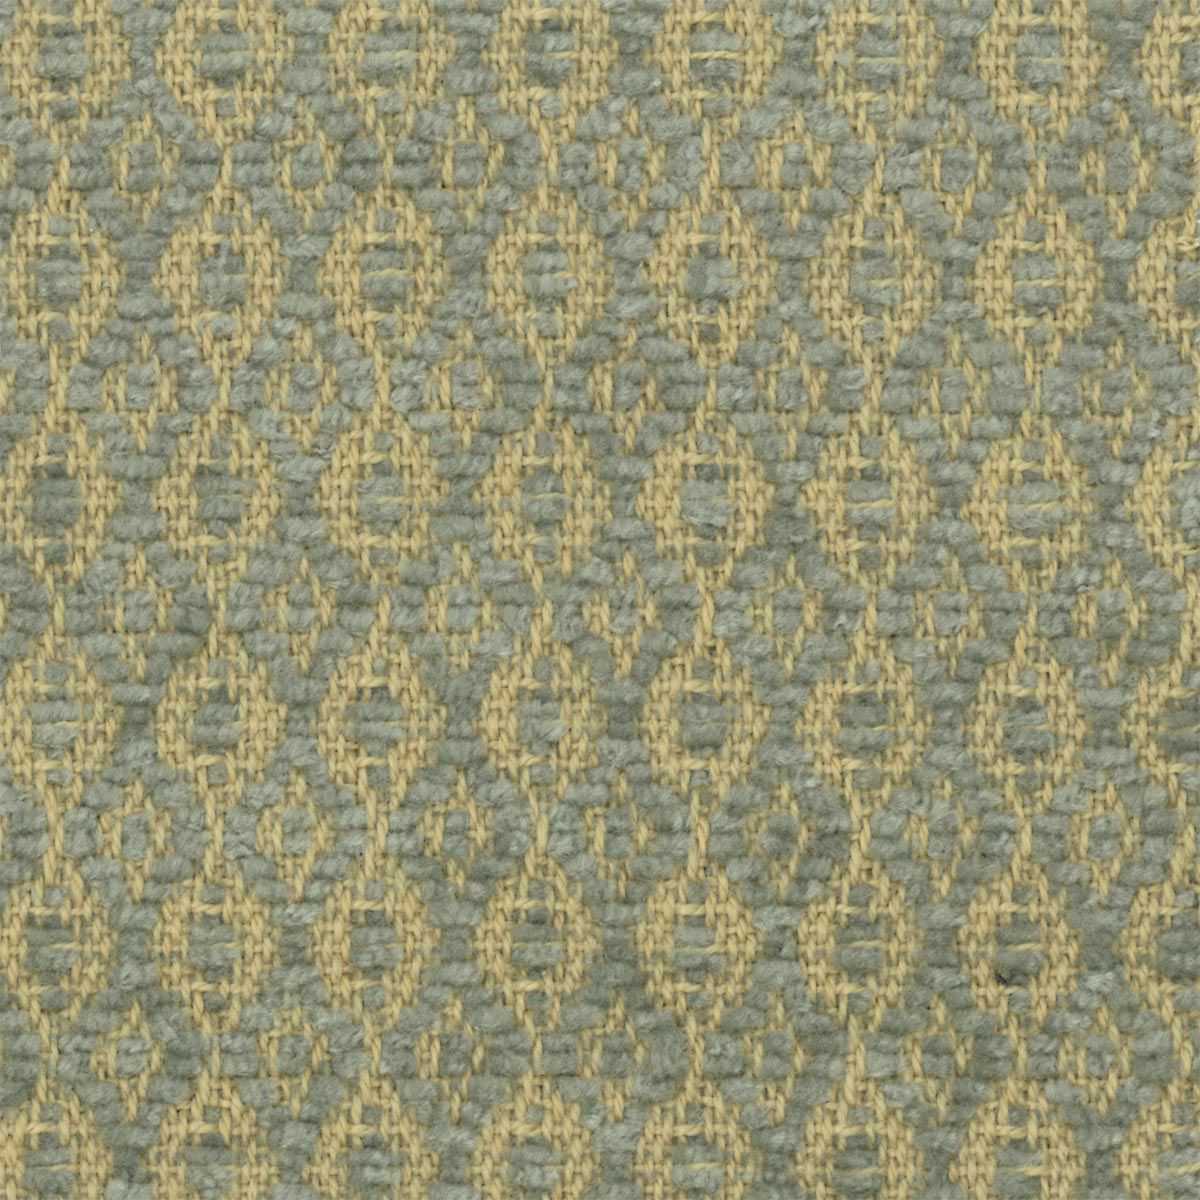 Jackson Hole fabric in aspen color - pattern number PW 00021512 - by Scalamandre in the Old World Weavers collection